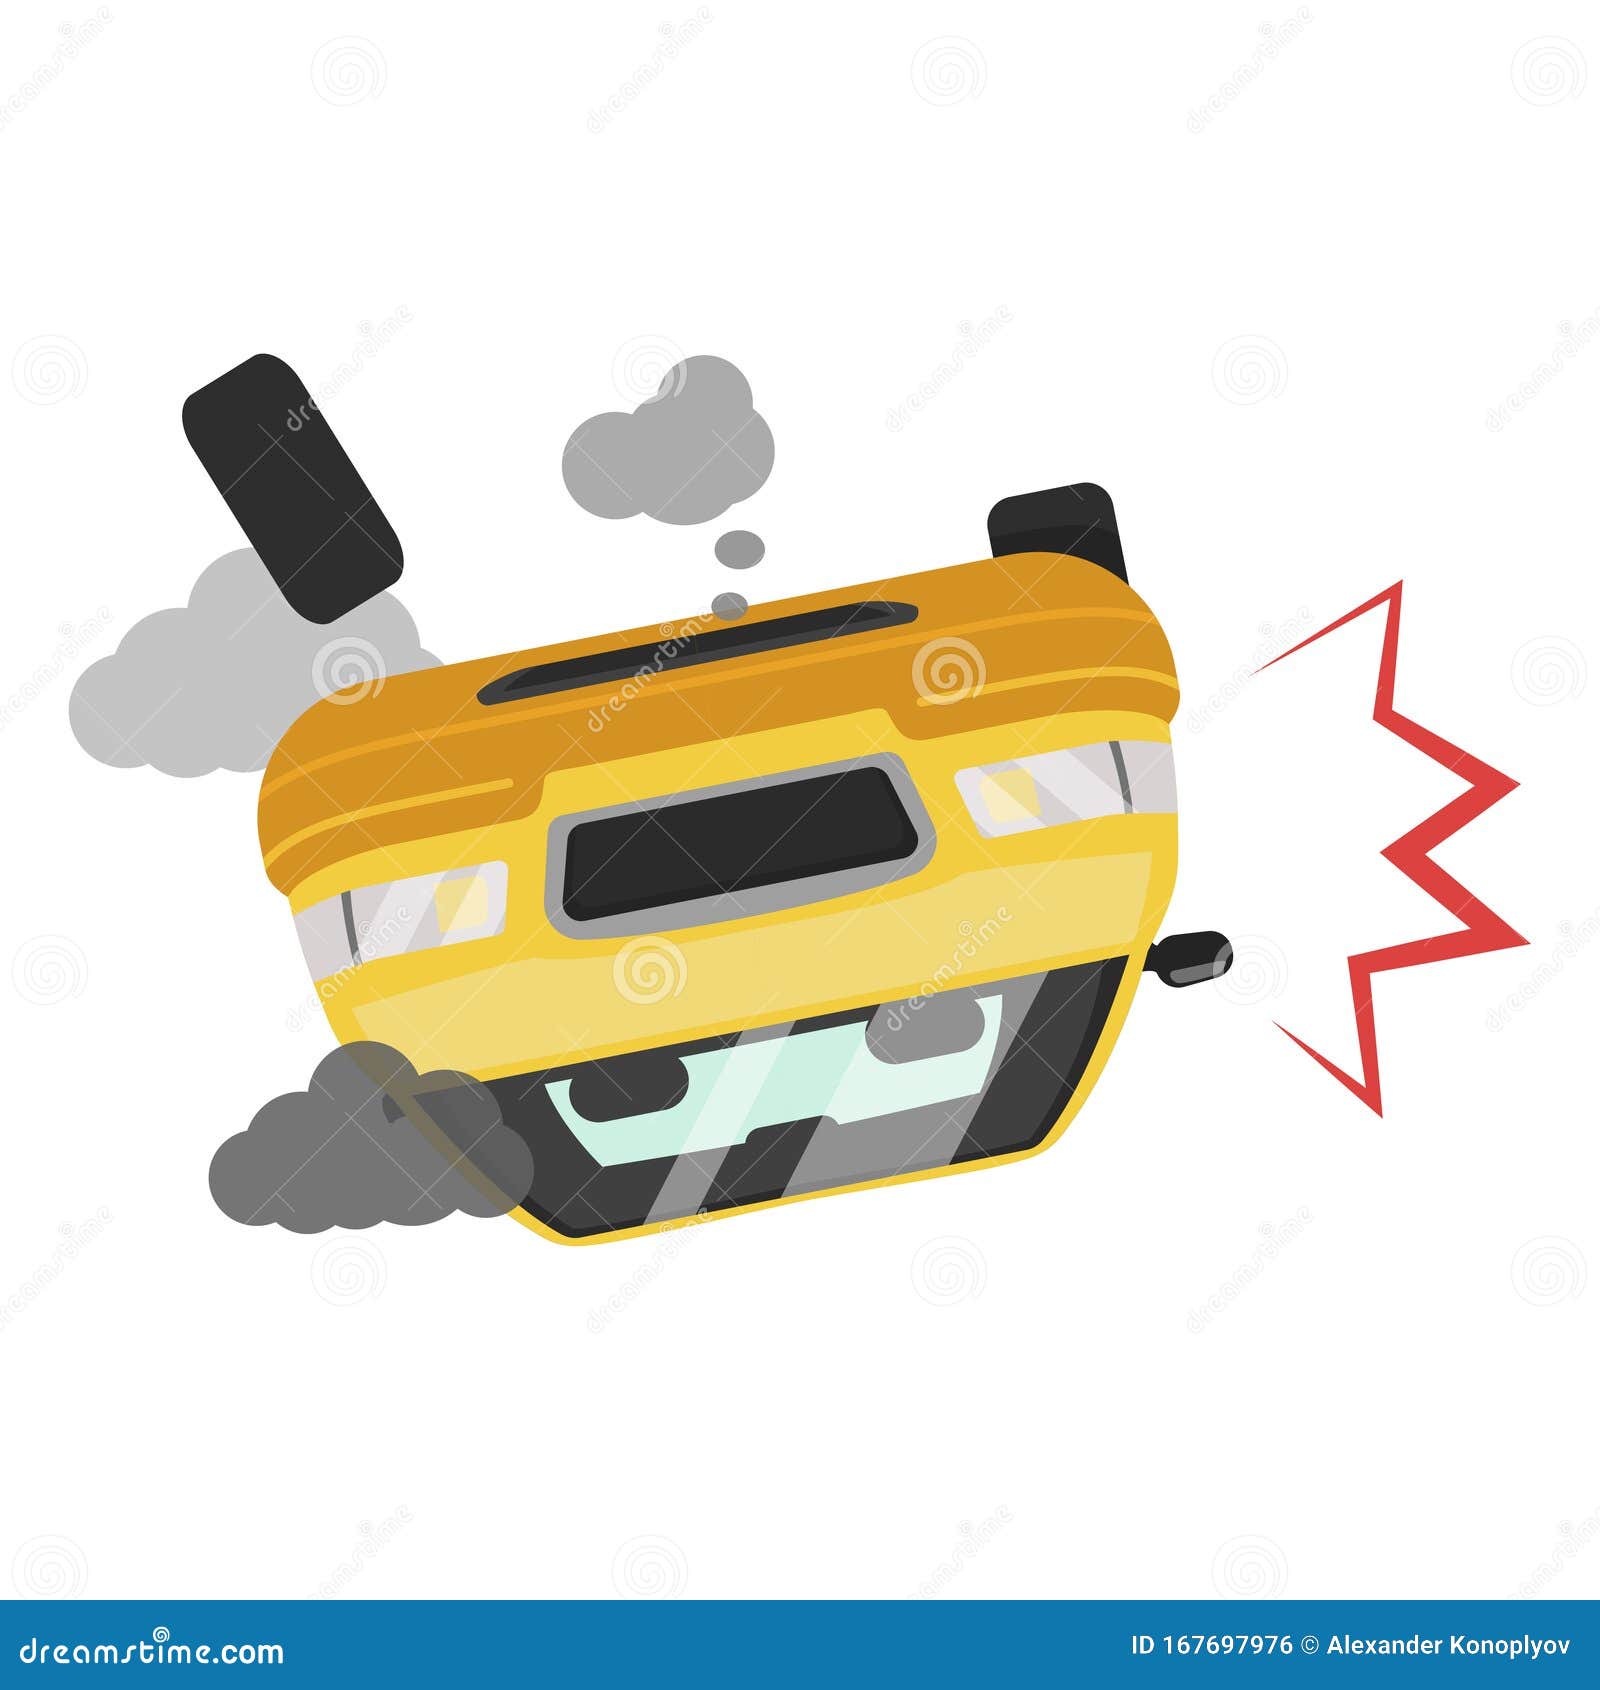 car accident icon, road traffic vehicle fatality